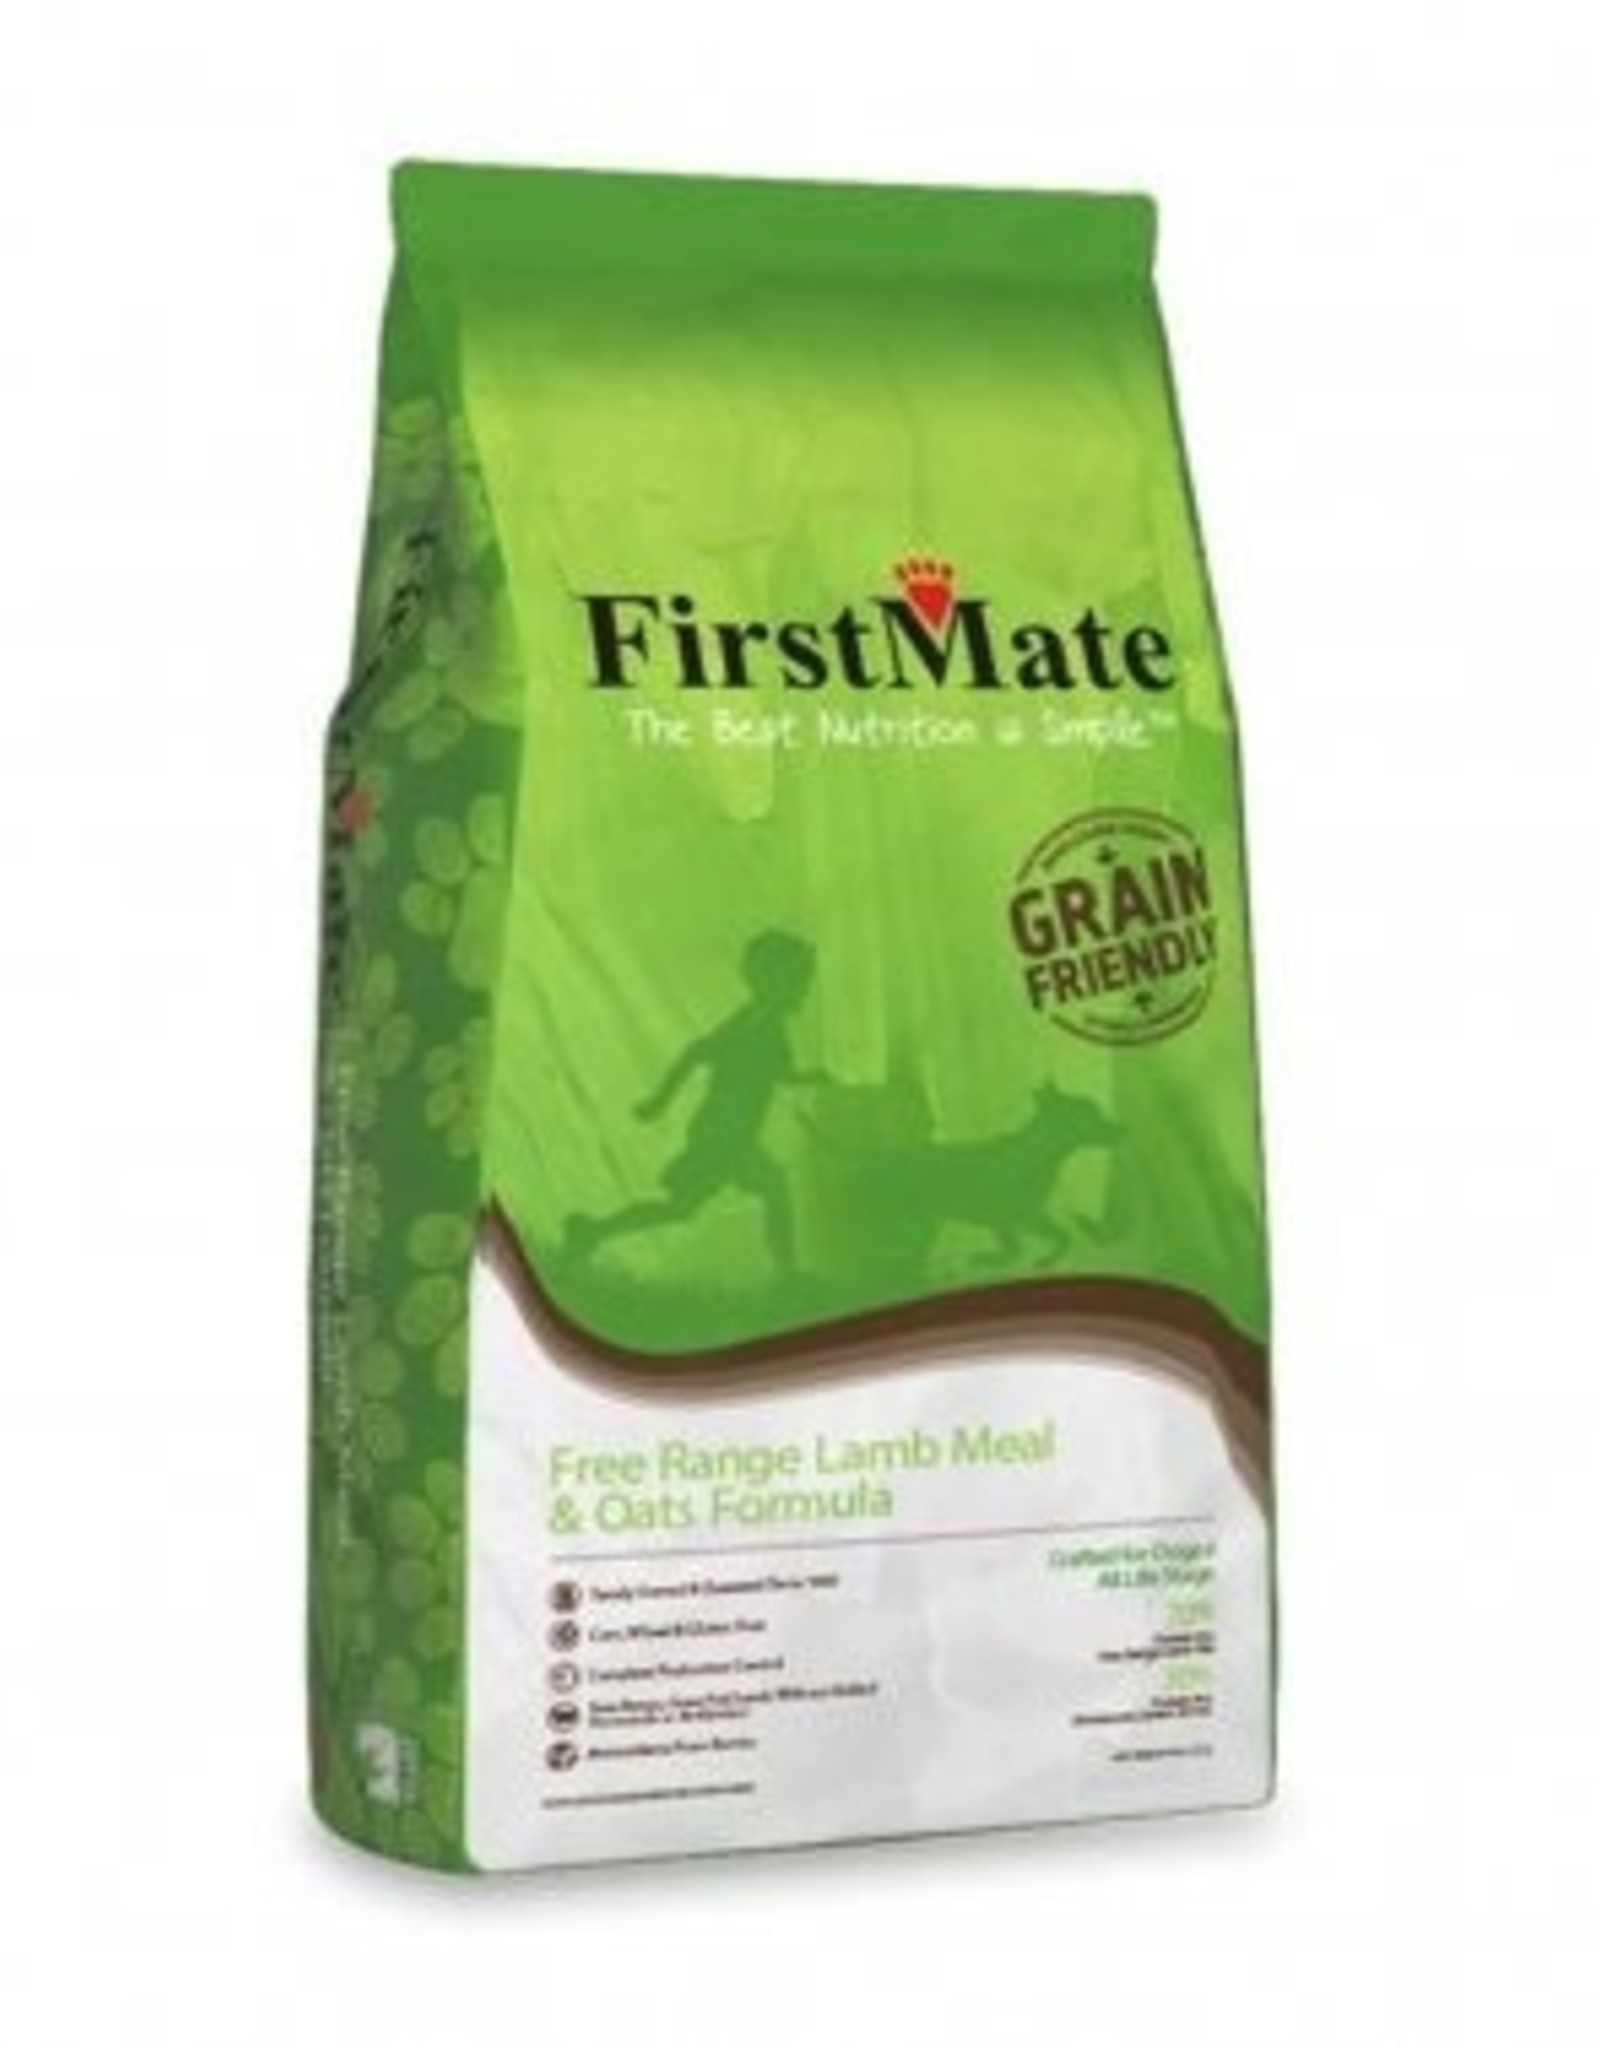 FirstMate First Mate Grain Friendly Lamb and Oats Dog Food 5#